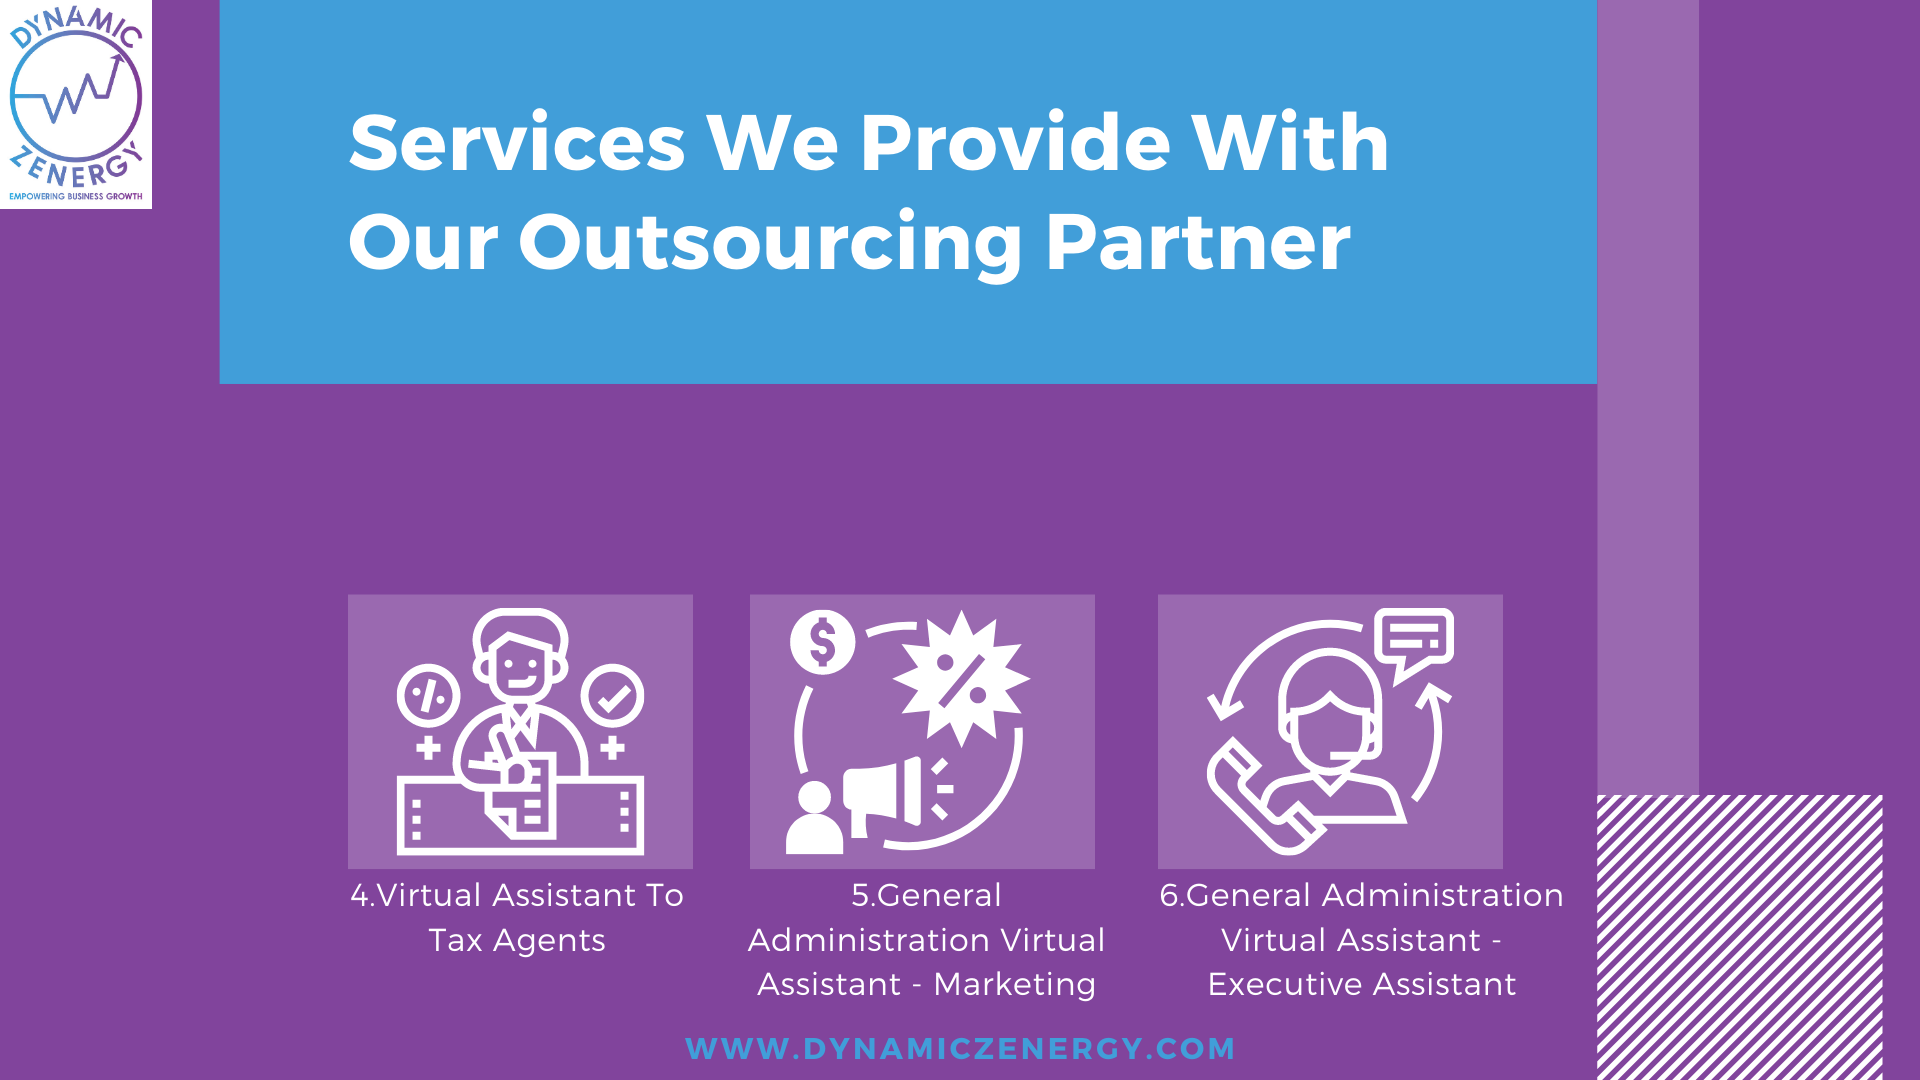 maus outsourcing partners